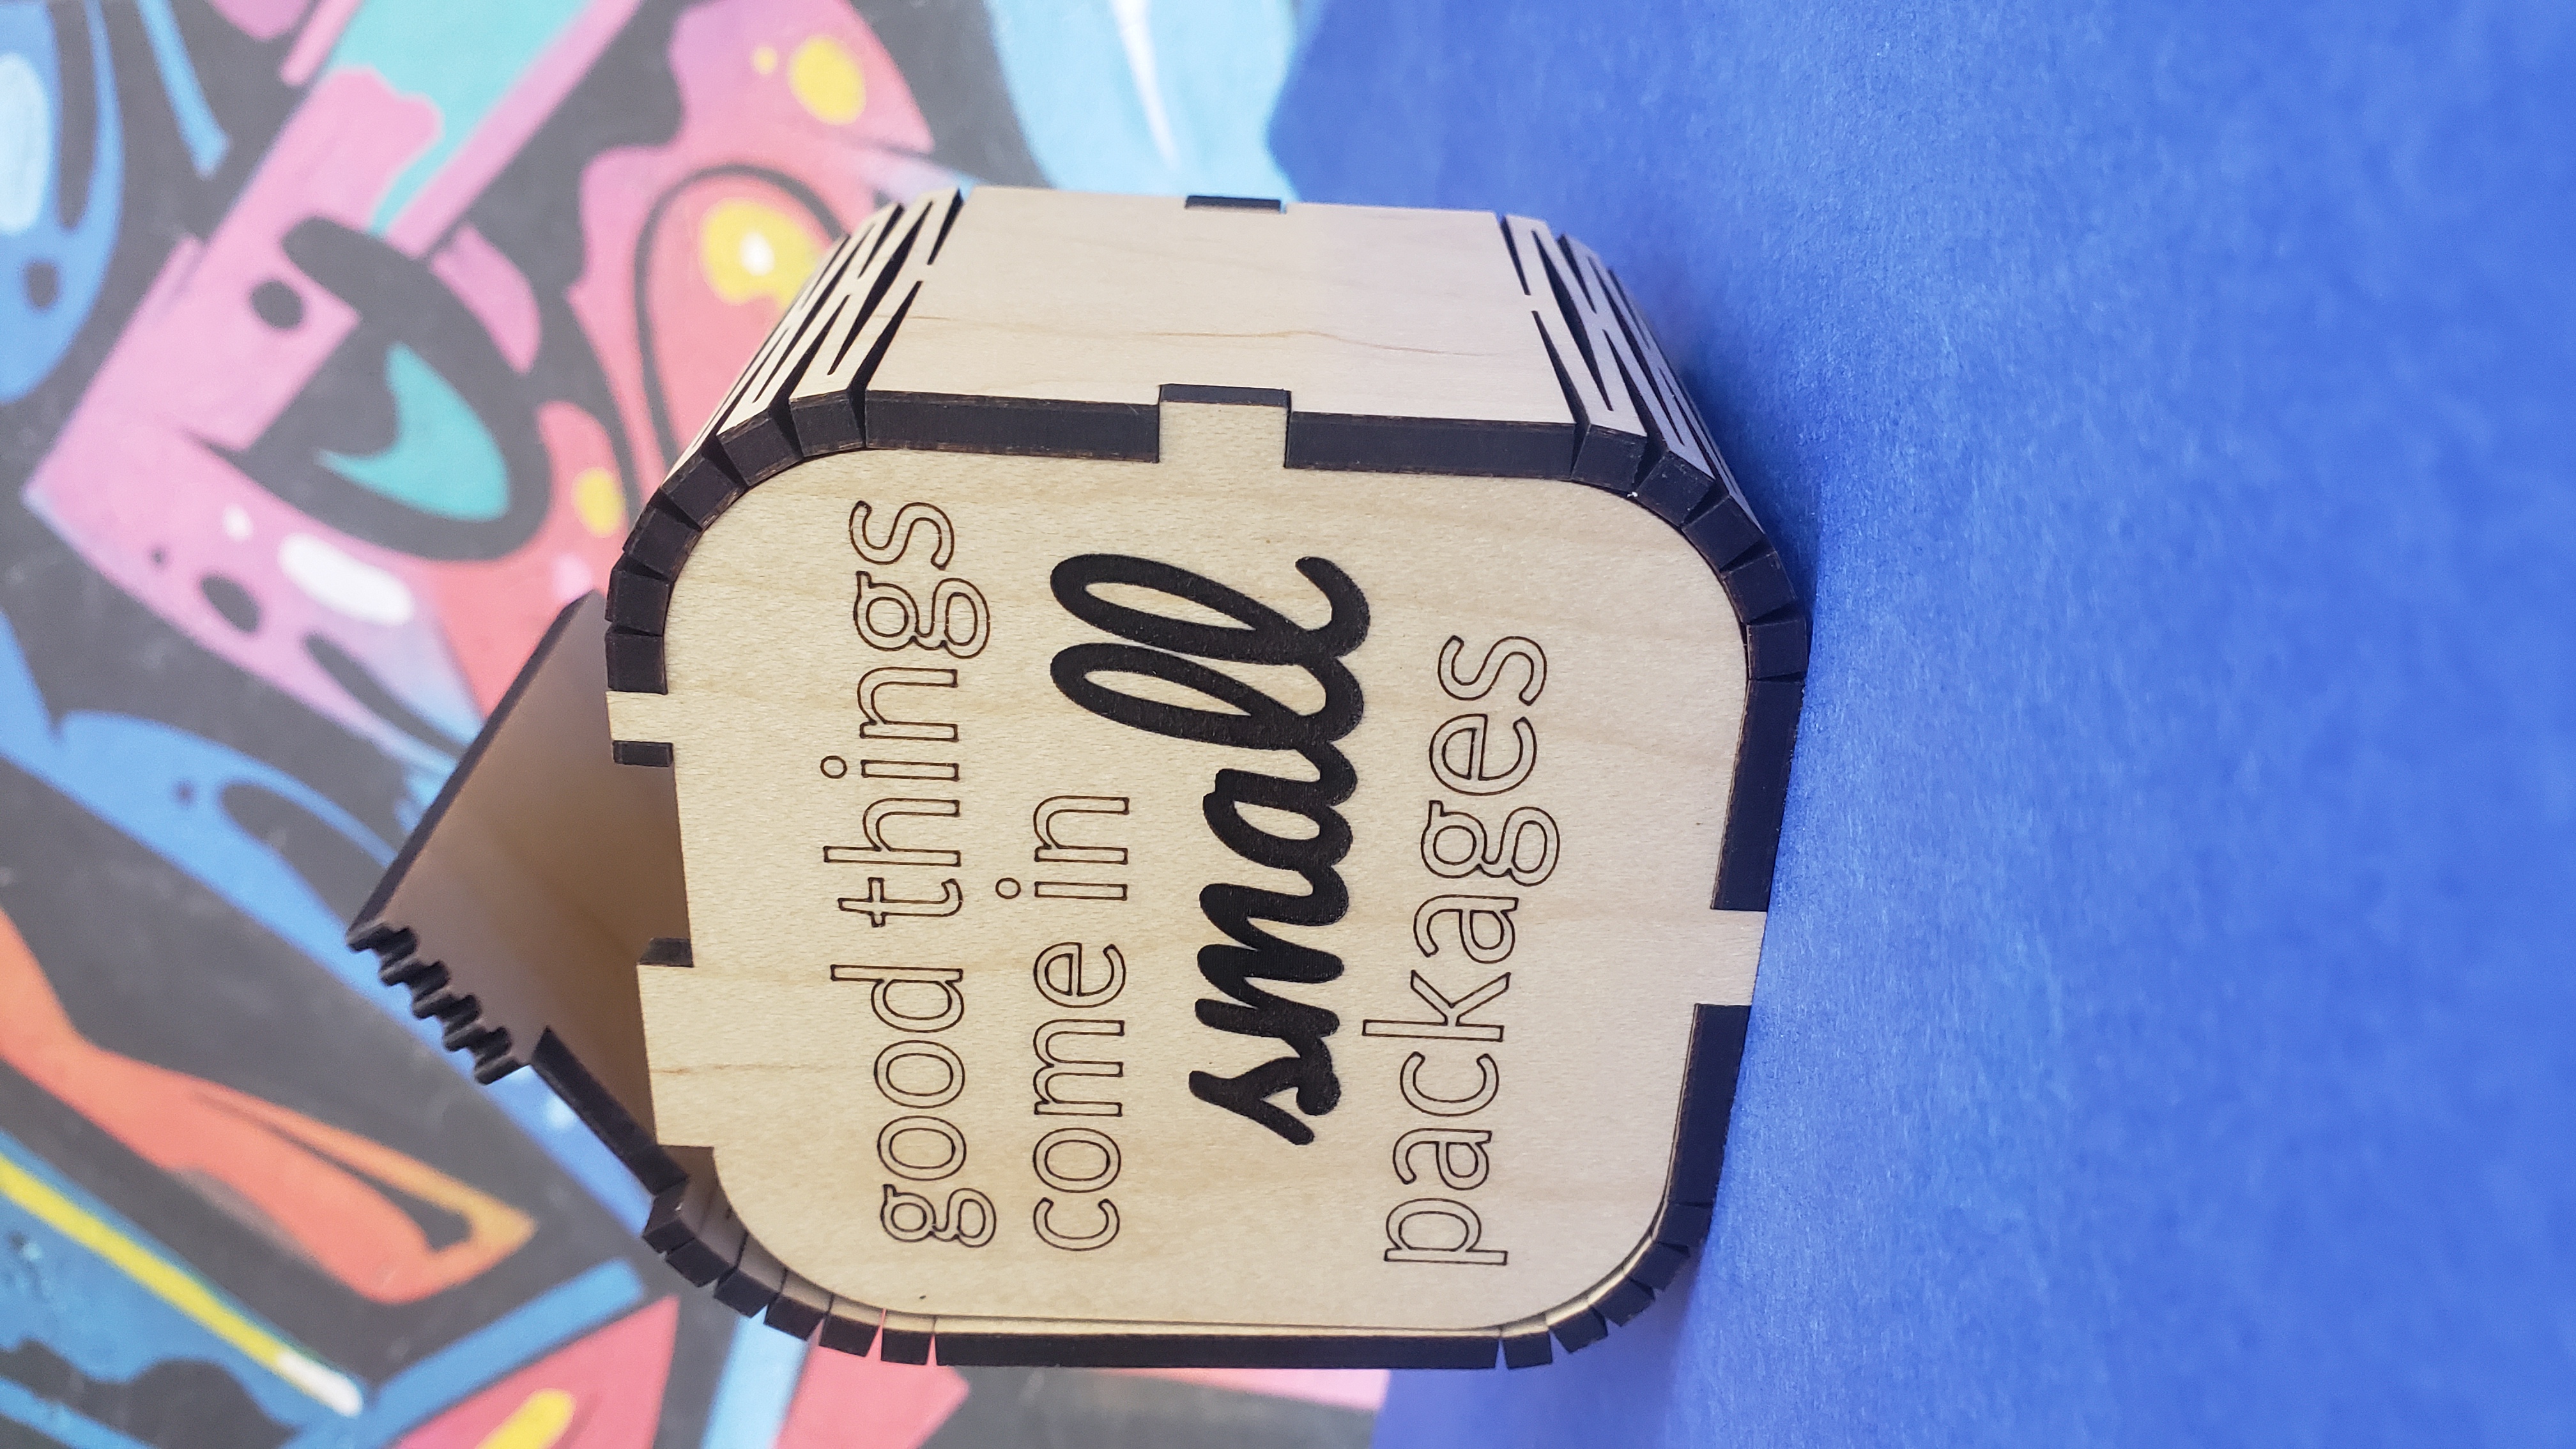 Laser cut wooden box with the words "good things come in small packages" engraved.